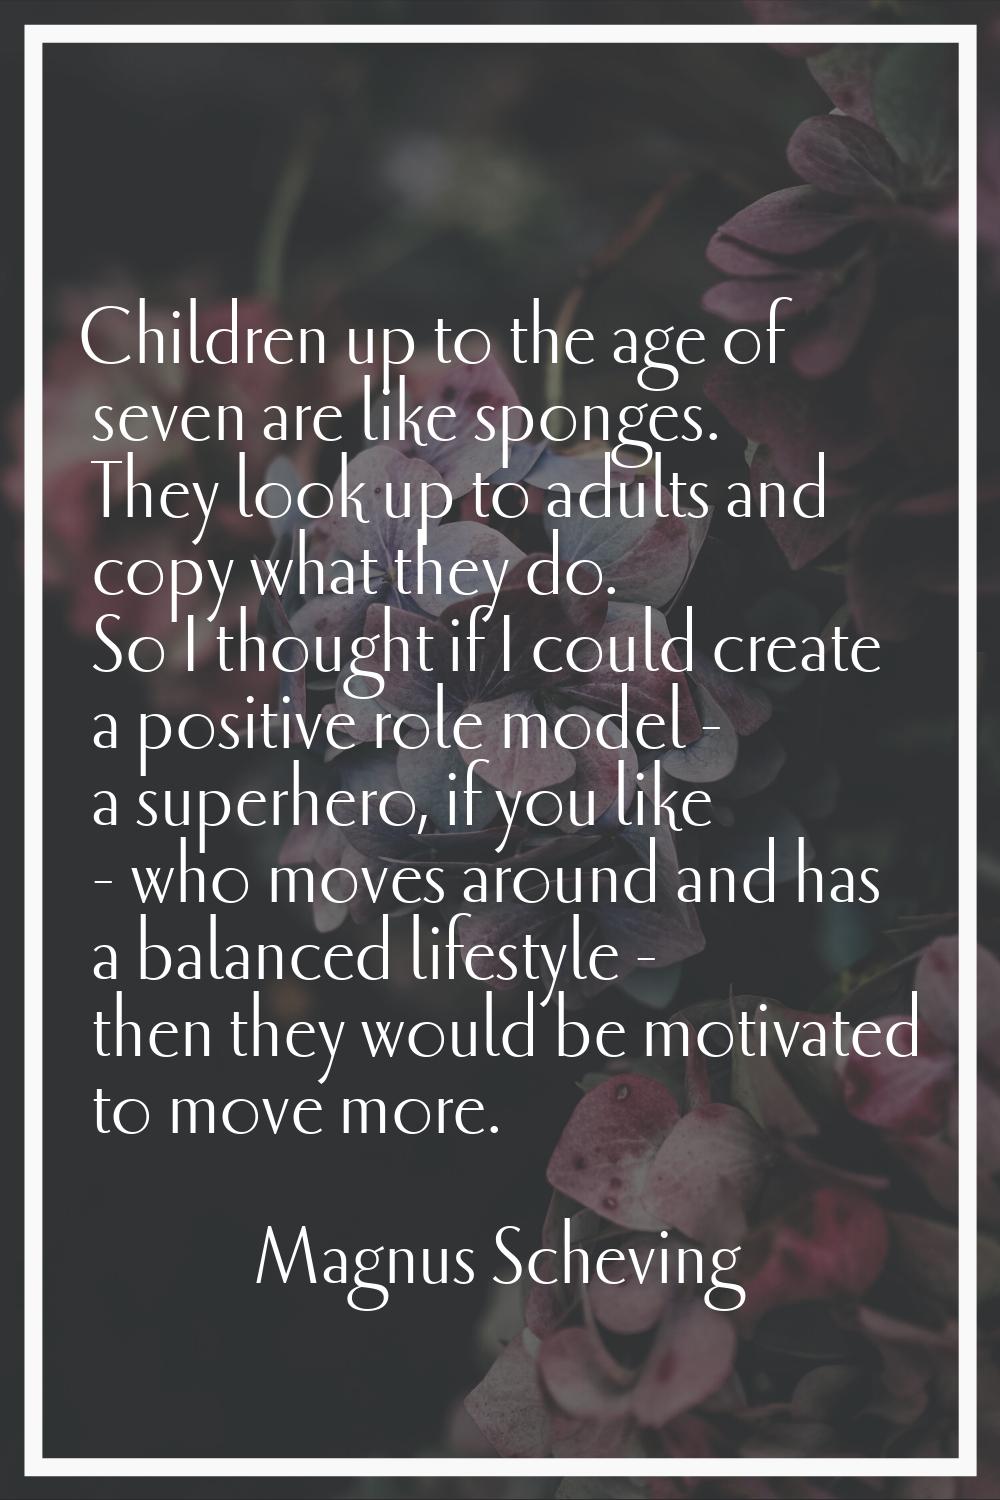 Children up to the age of seven are like sponges. They look up to adults and copy what they do. So 